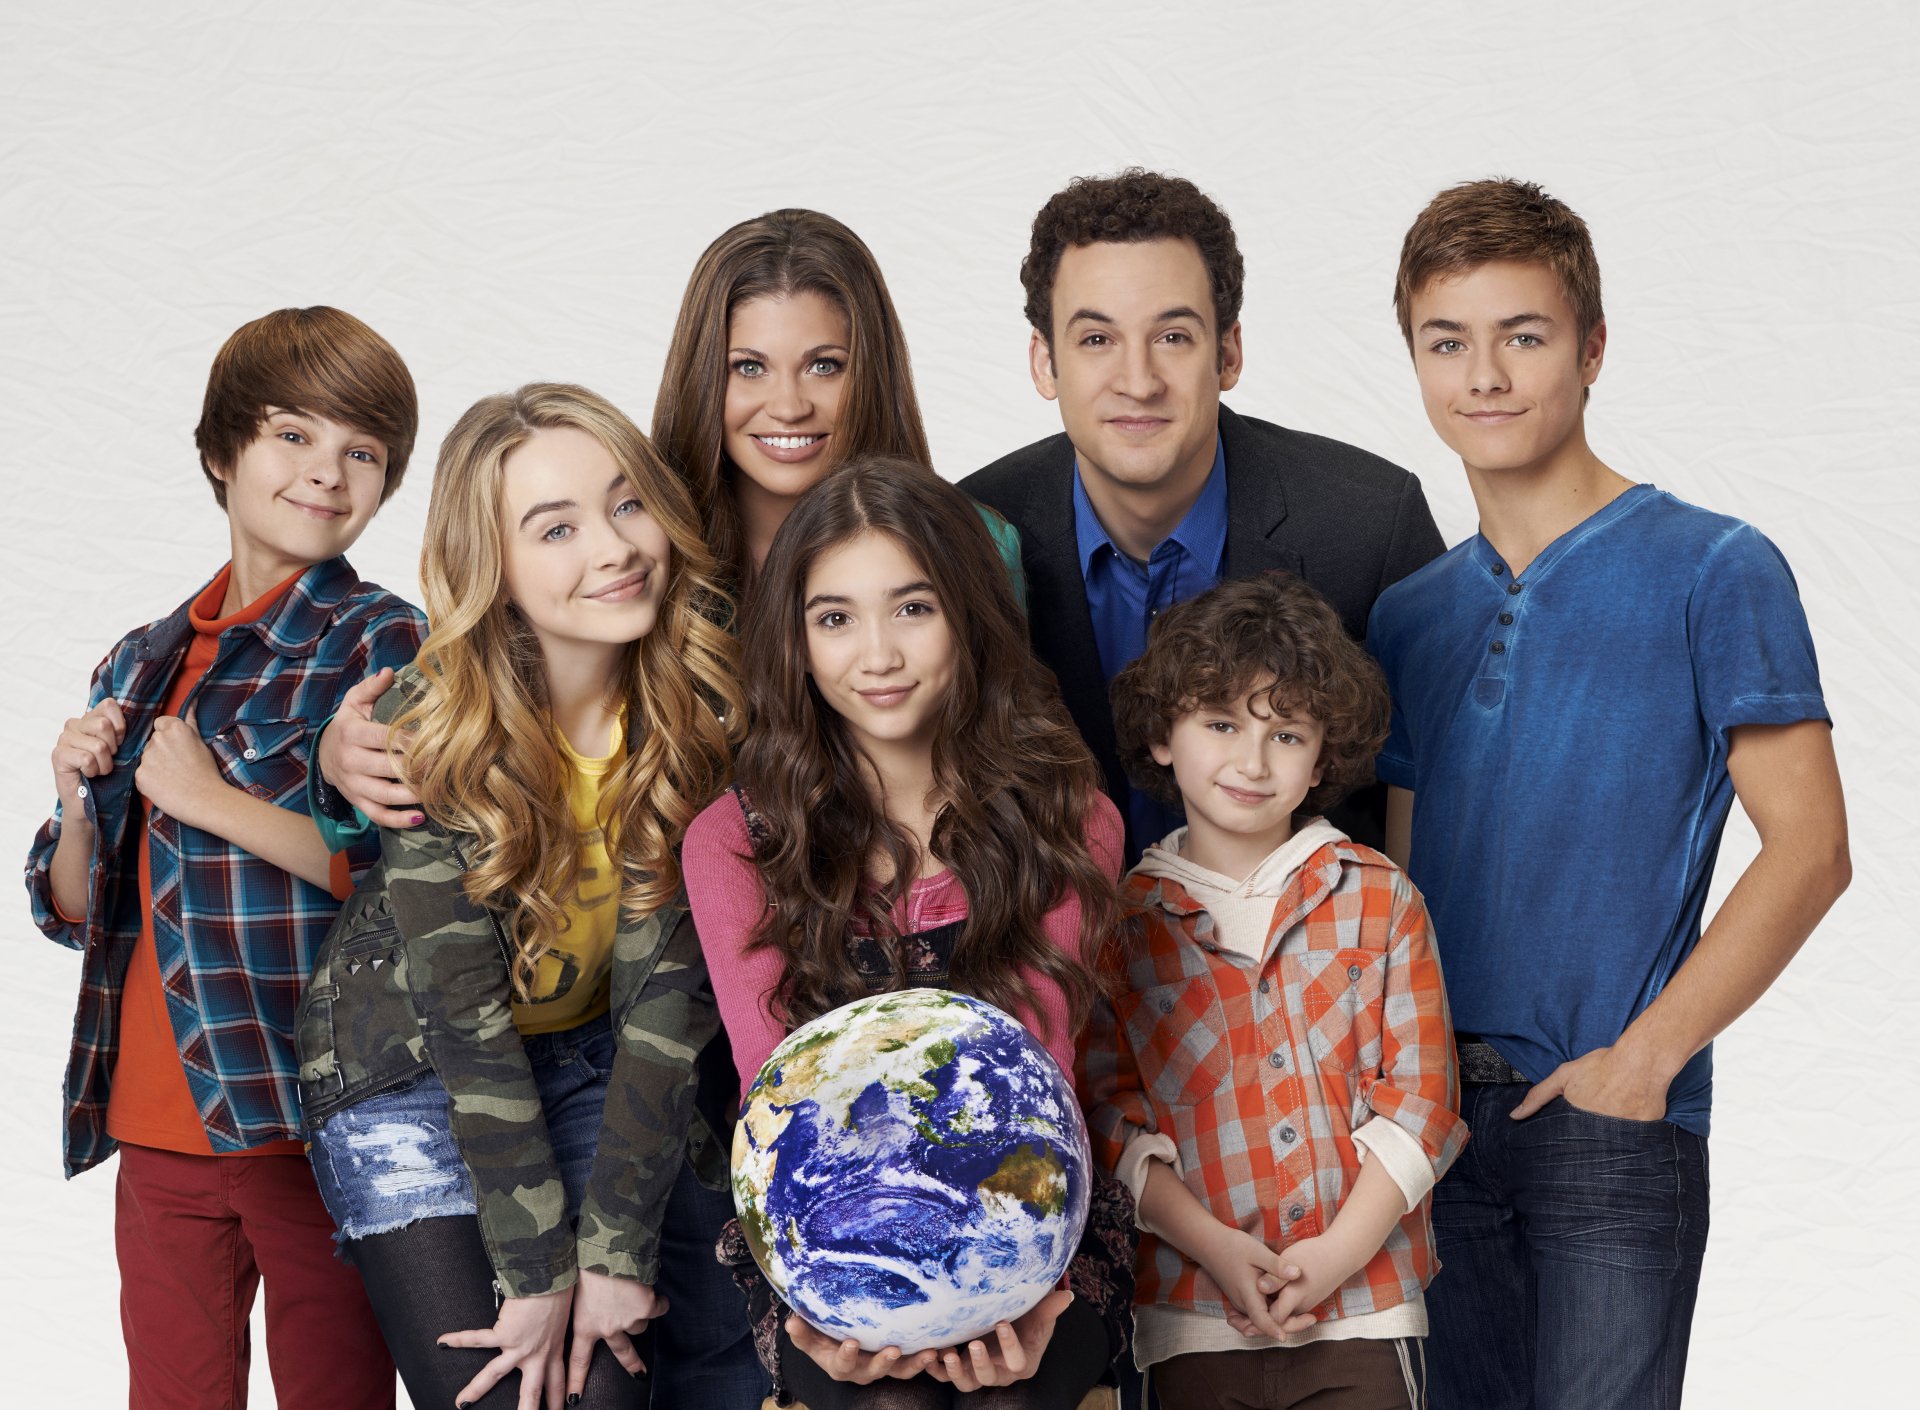 Images Of Girl Meets World Wallpapers